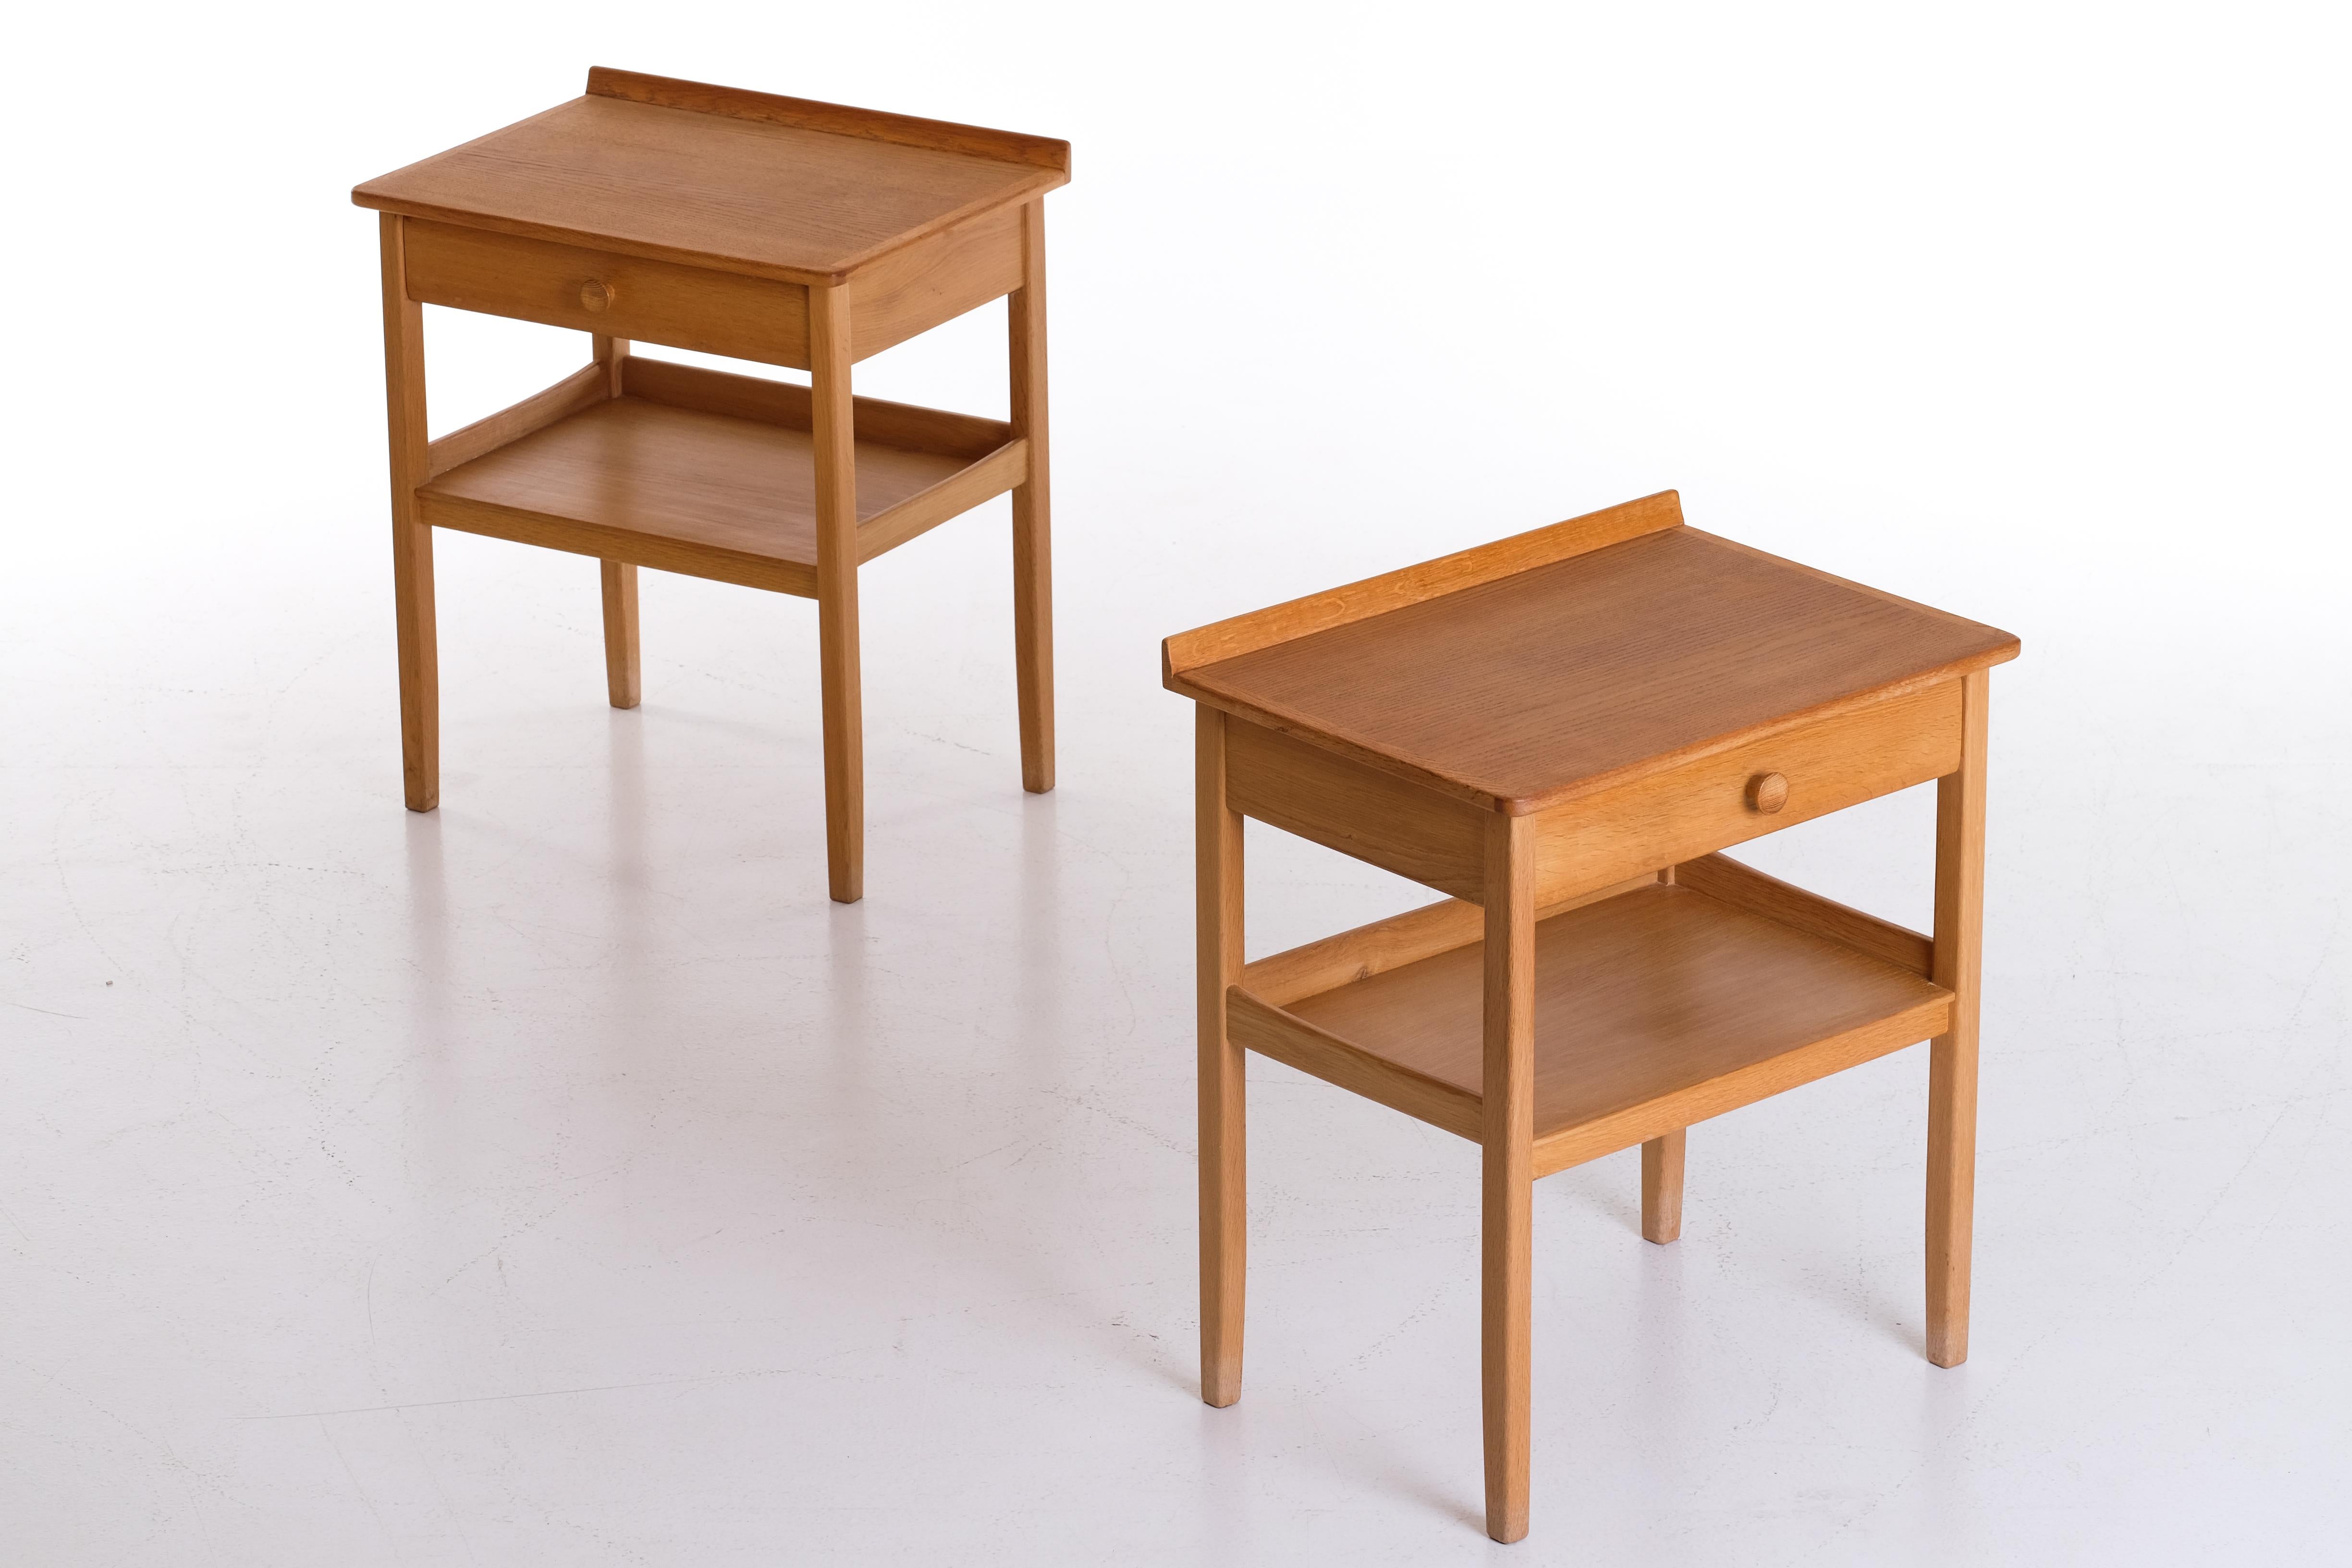 Pair of elegant bedside tables designed by Carl Malmsten, Sweden, 1960s.
Very good condition with small signs of usage and patina. Signed.